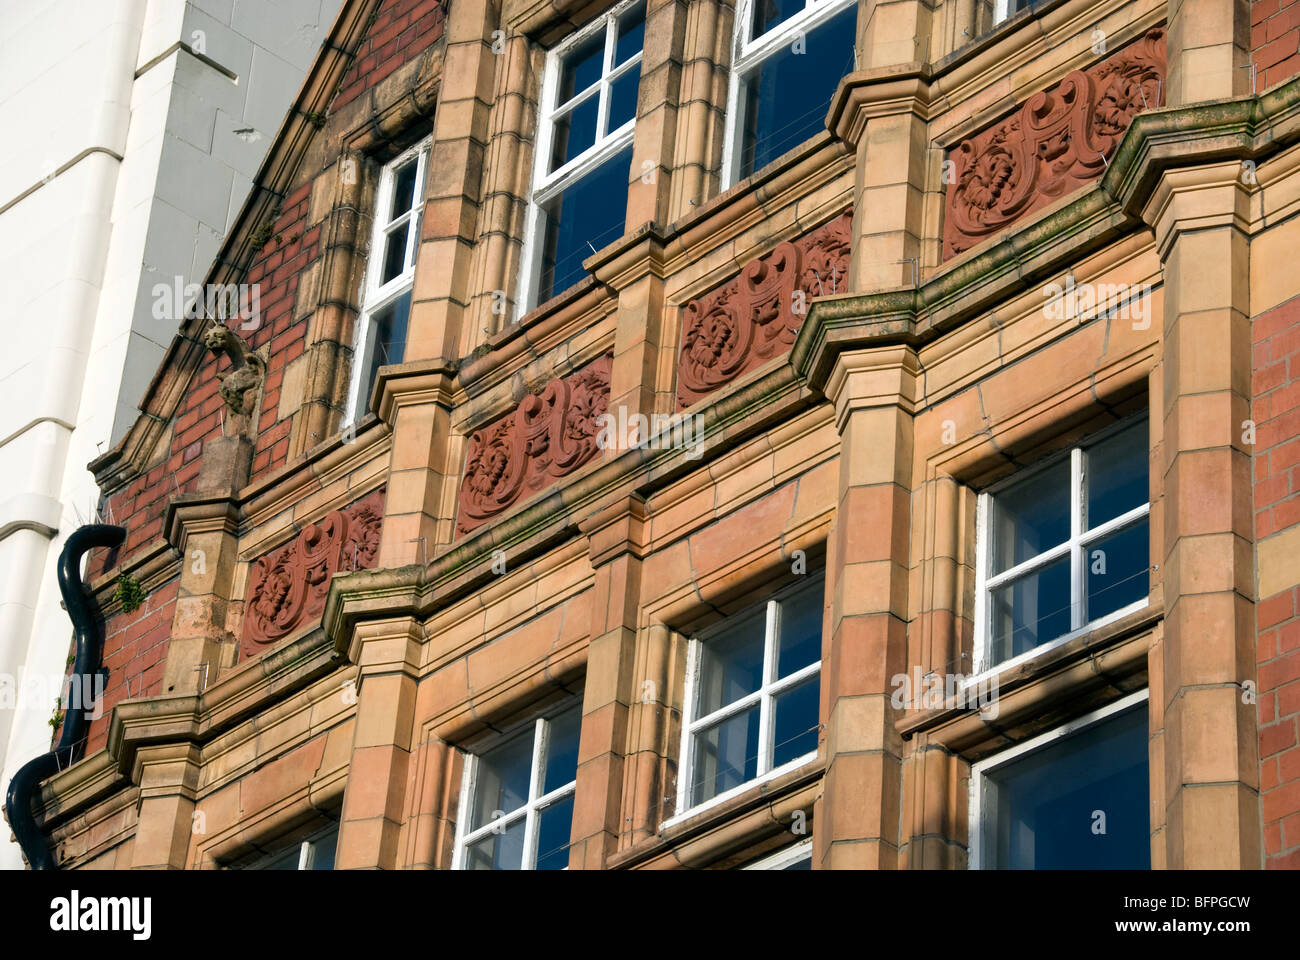 Detail of the ornate stone work on one of the buildings in Grange Road, Birkenhead, Wirral Stock Photo